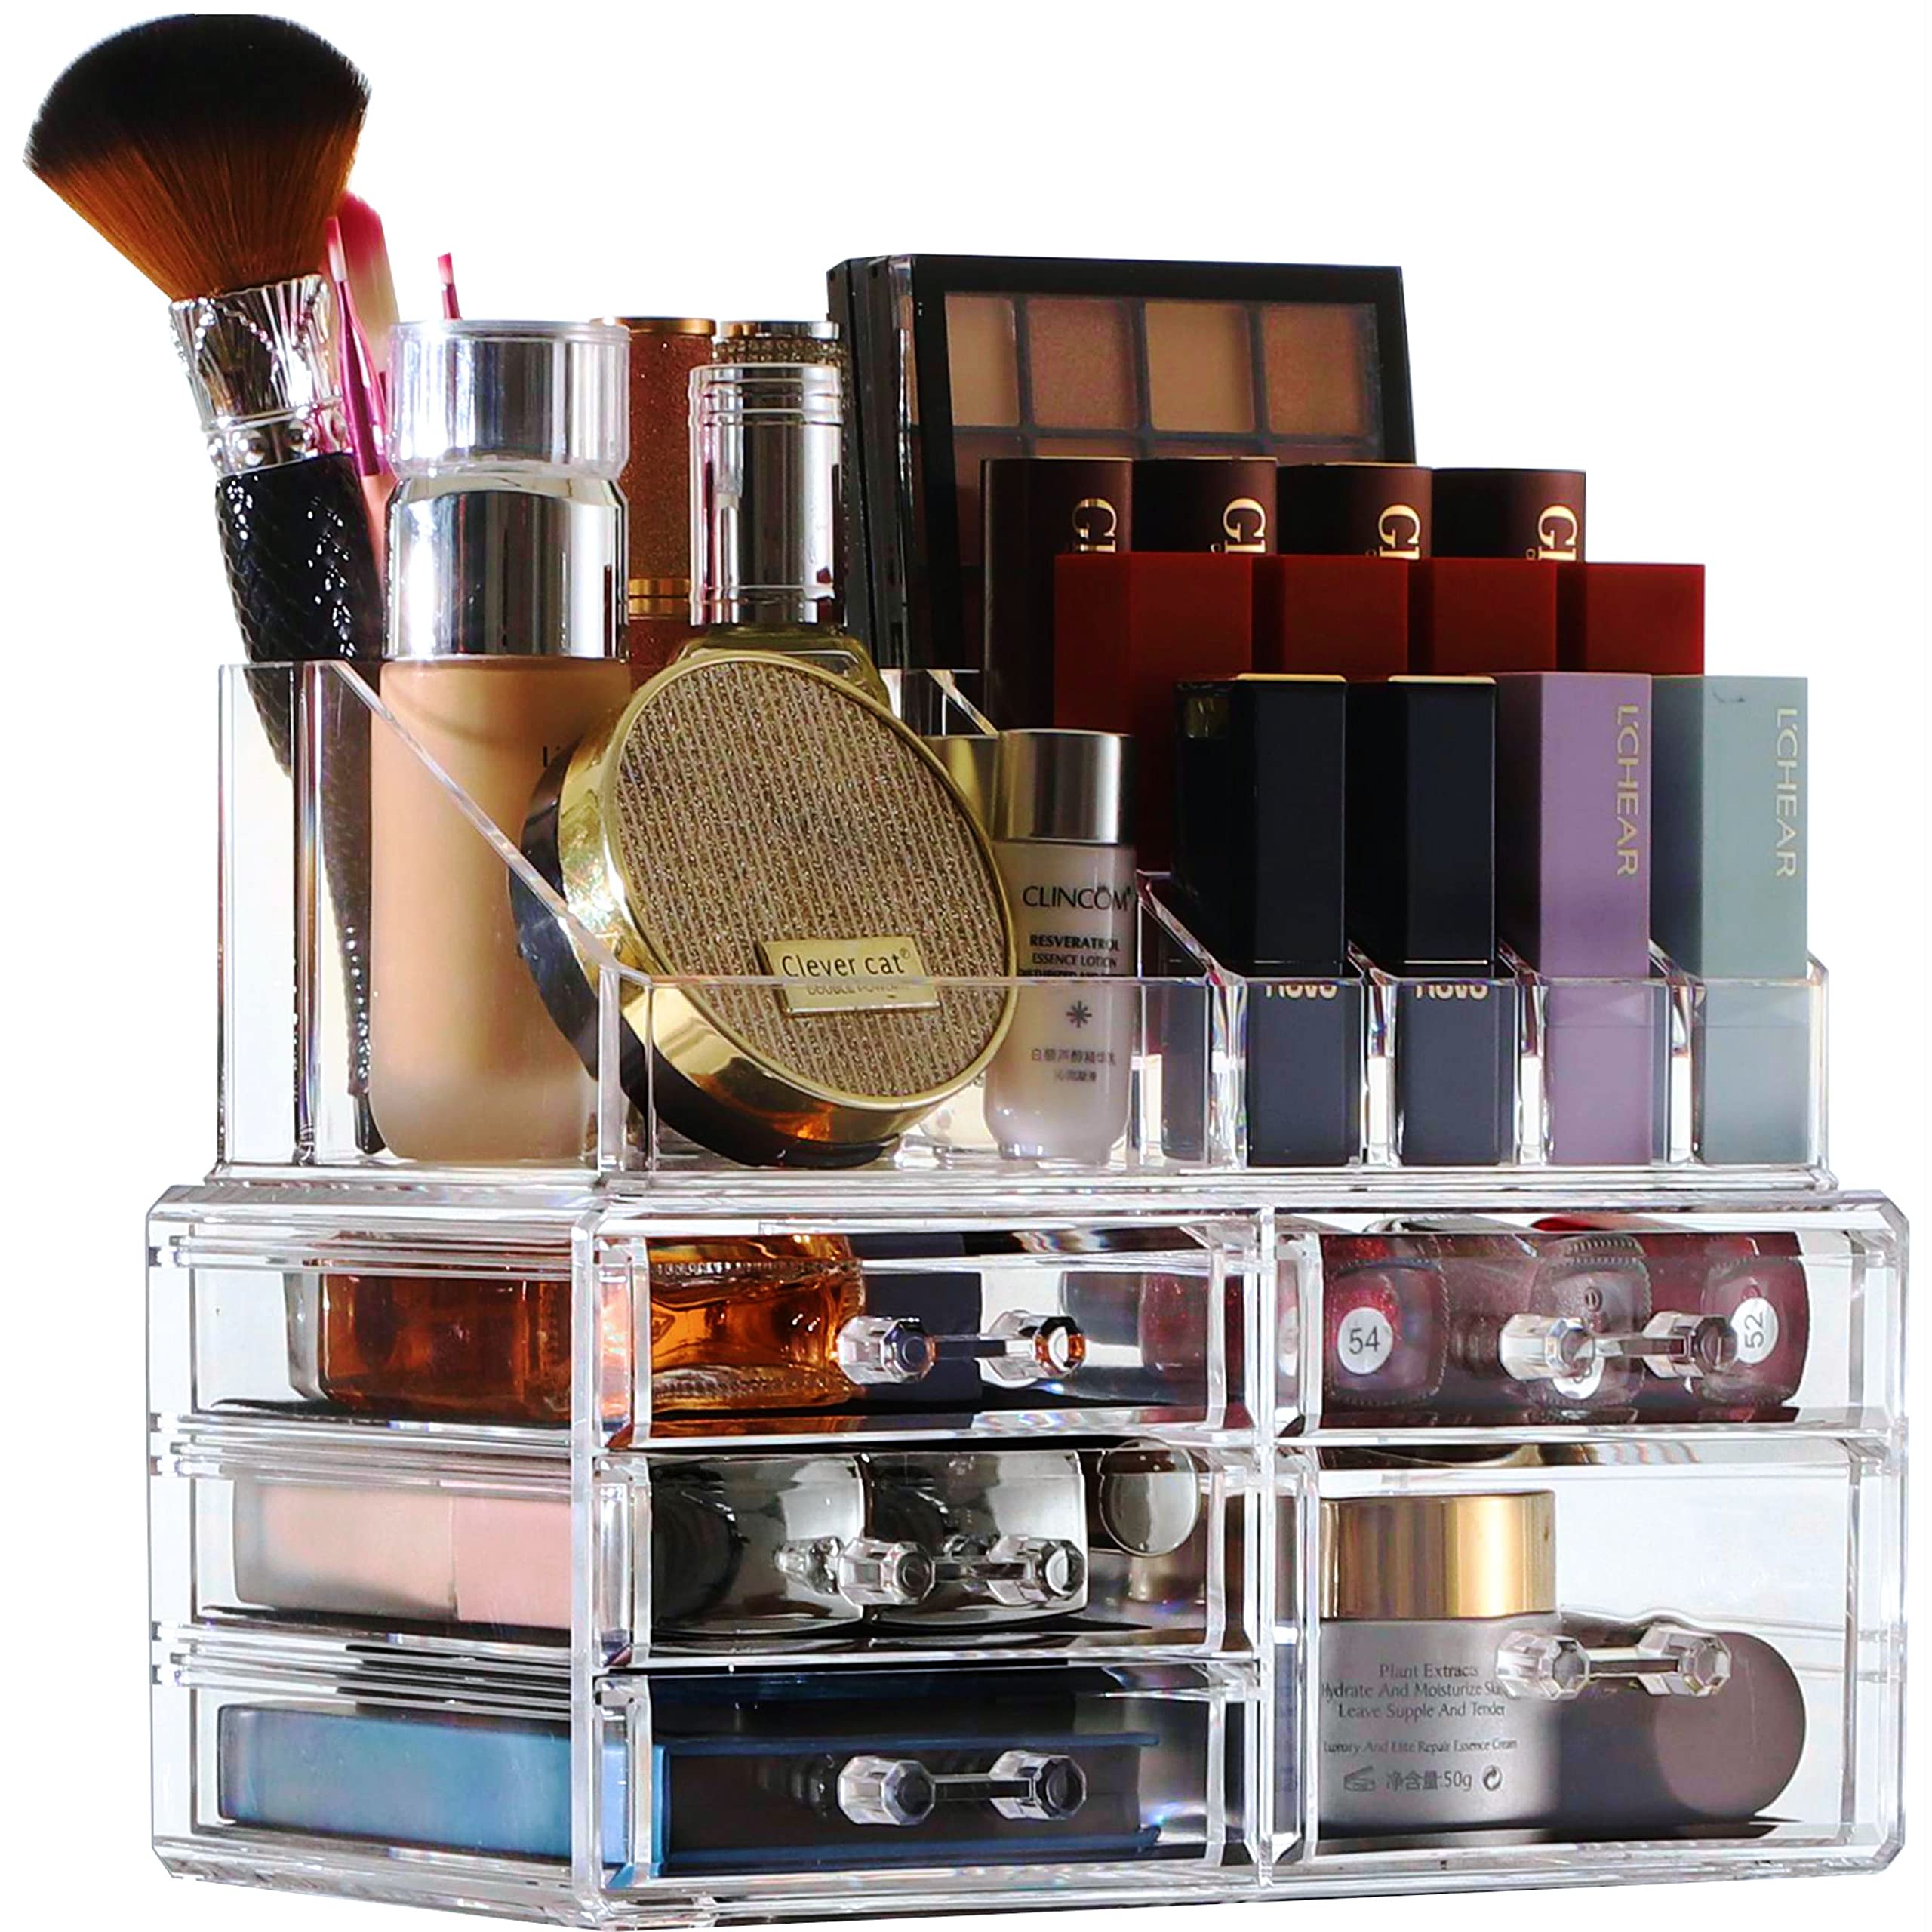 Cq acrylic Makeup Organizer Skin Care Large Clear Cosmetic Display Cases Stackable Storage Box With 5 Drawers For Vanity,Set of 2